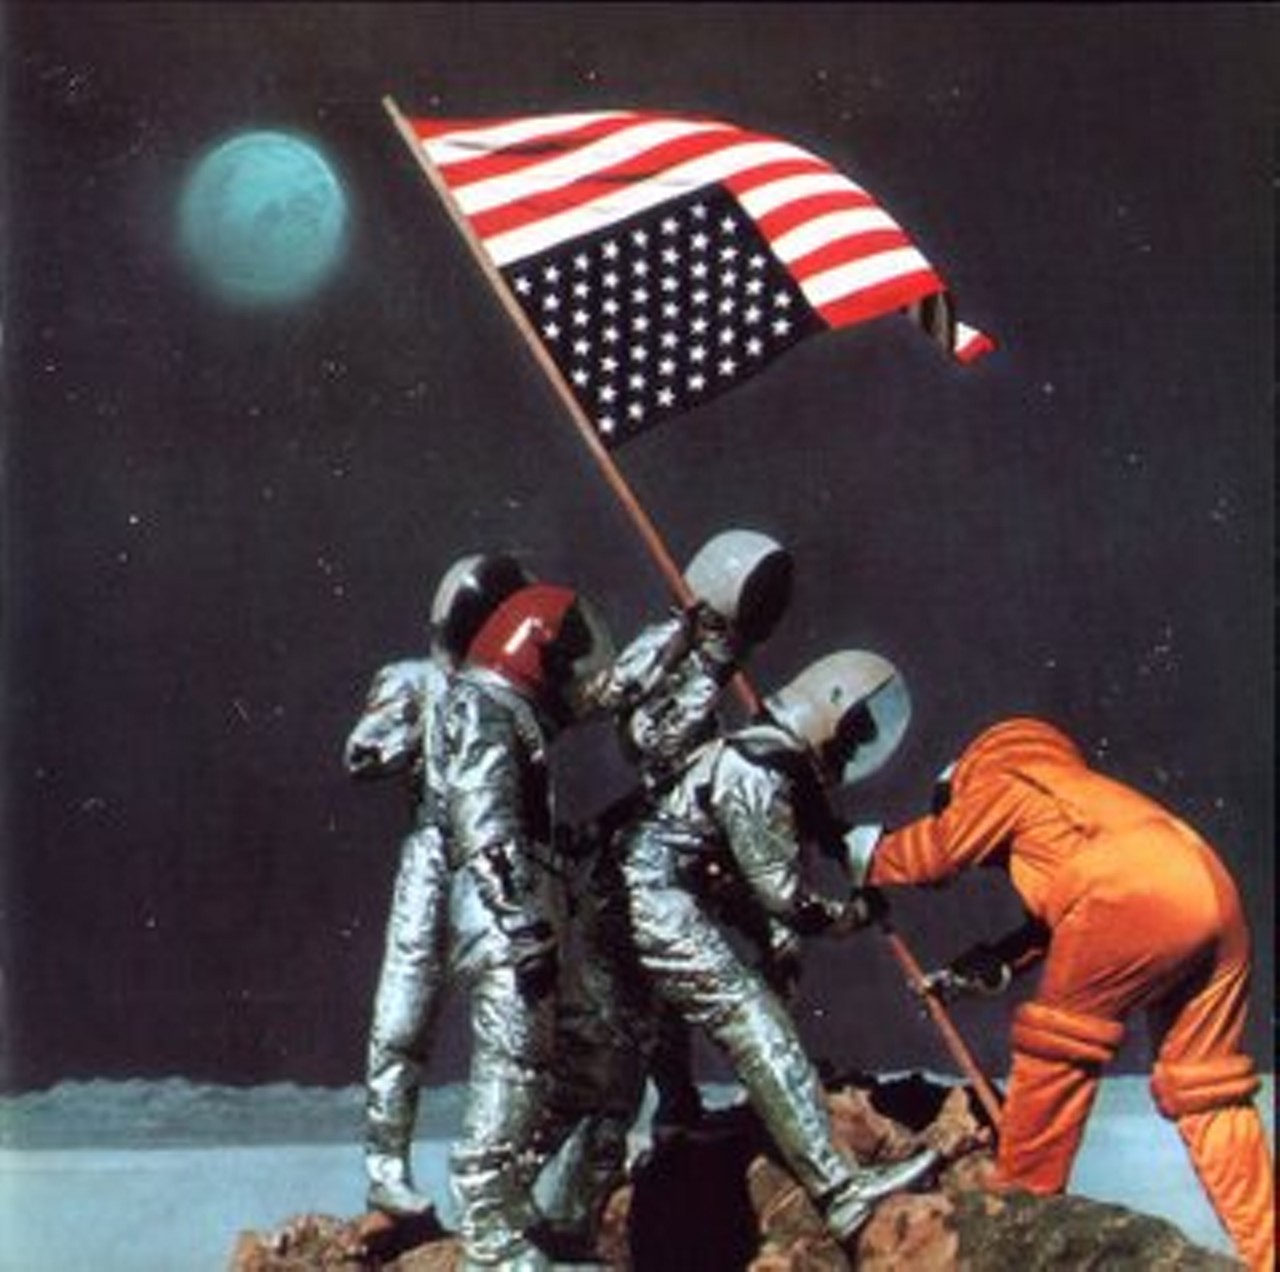 12. Another "Raising the Flag on Iwo Jima" bastardization, but Canned Heat ups the game by slapping it on the moon for their "Future Blues" album.